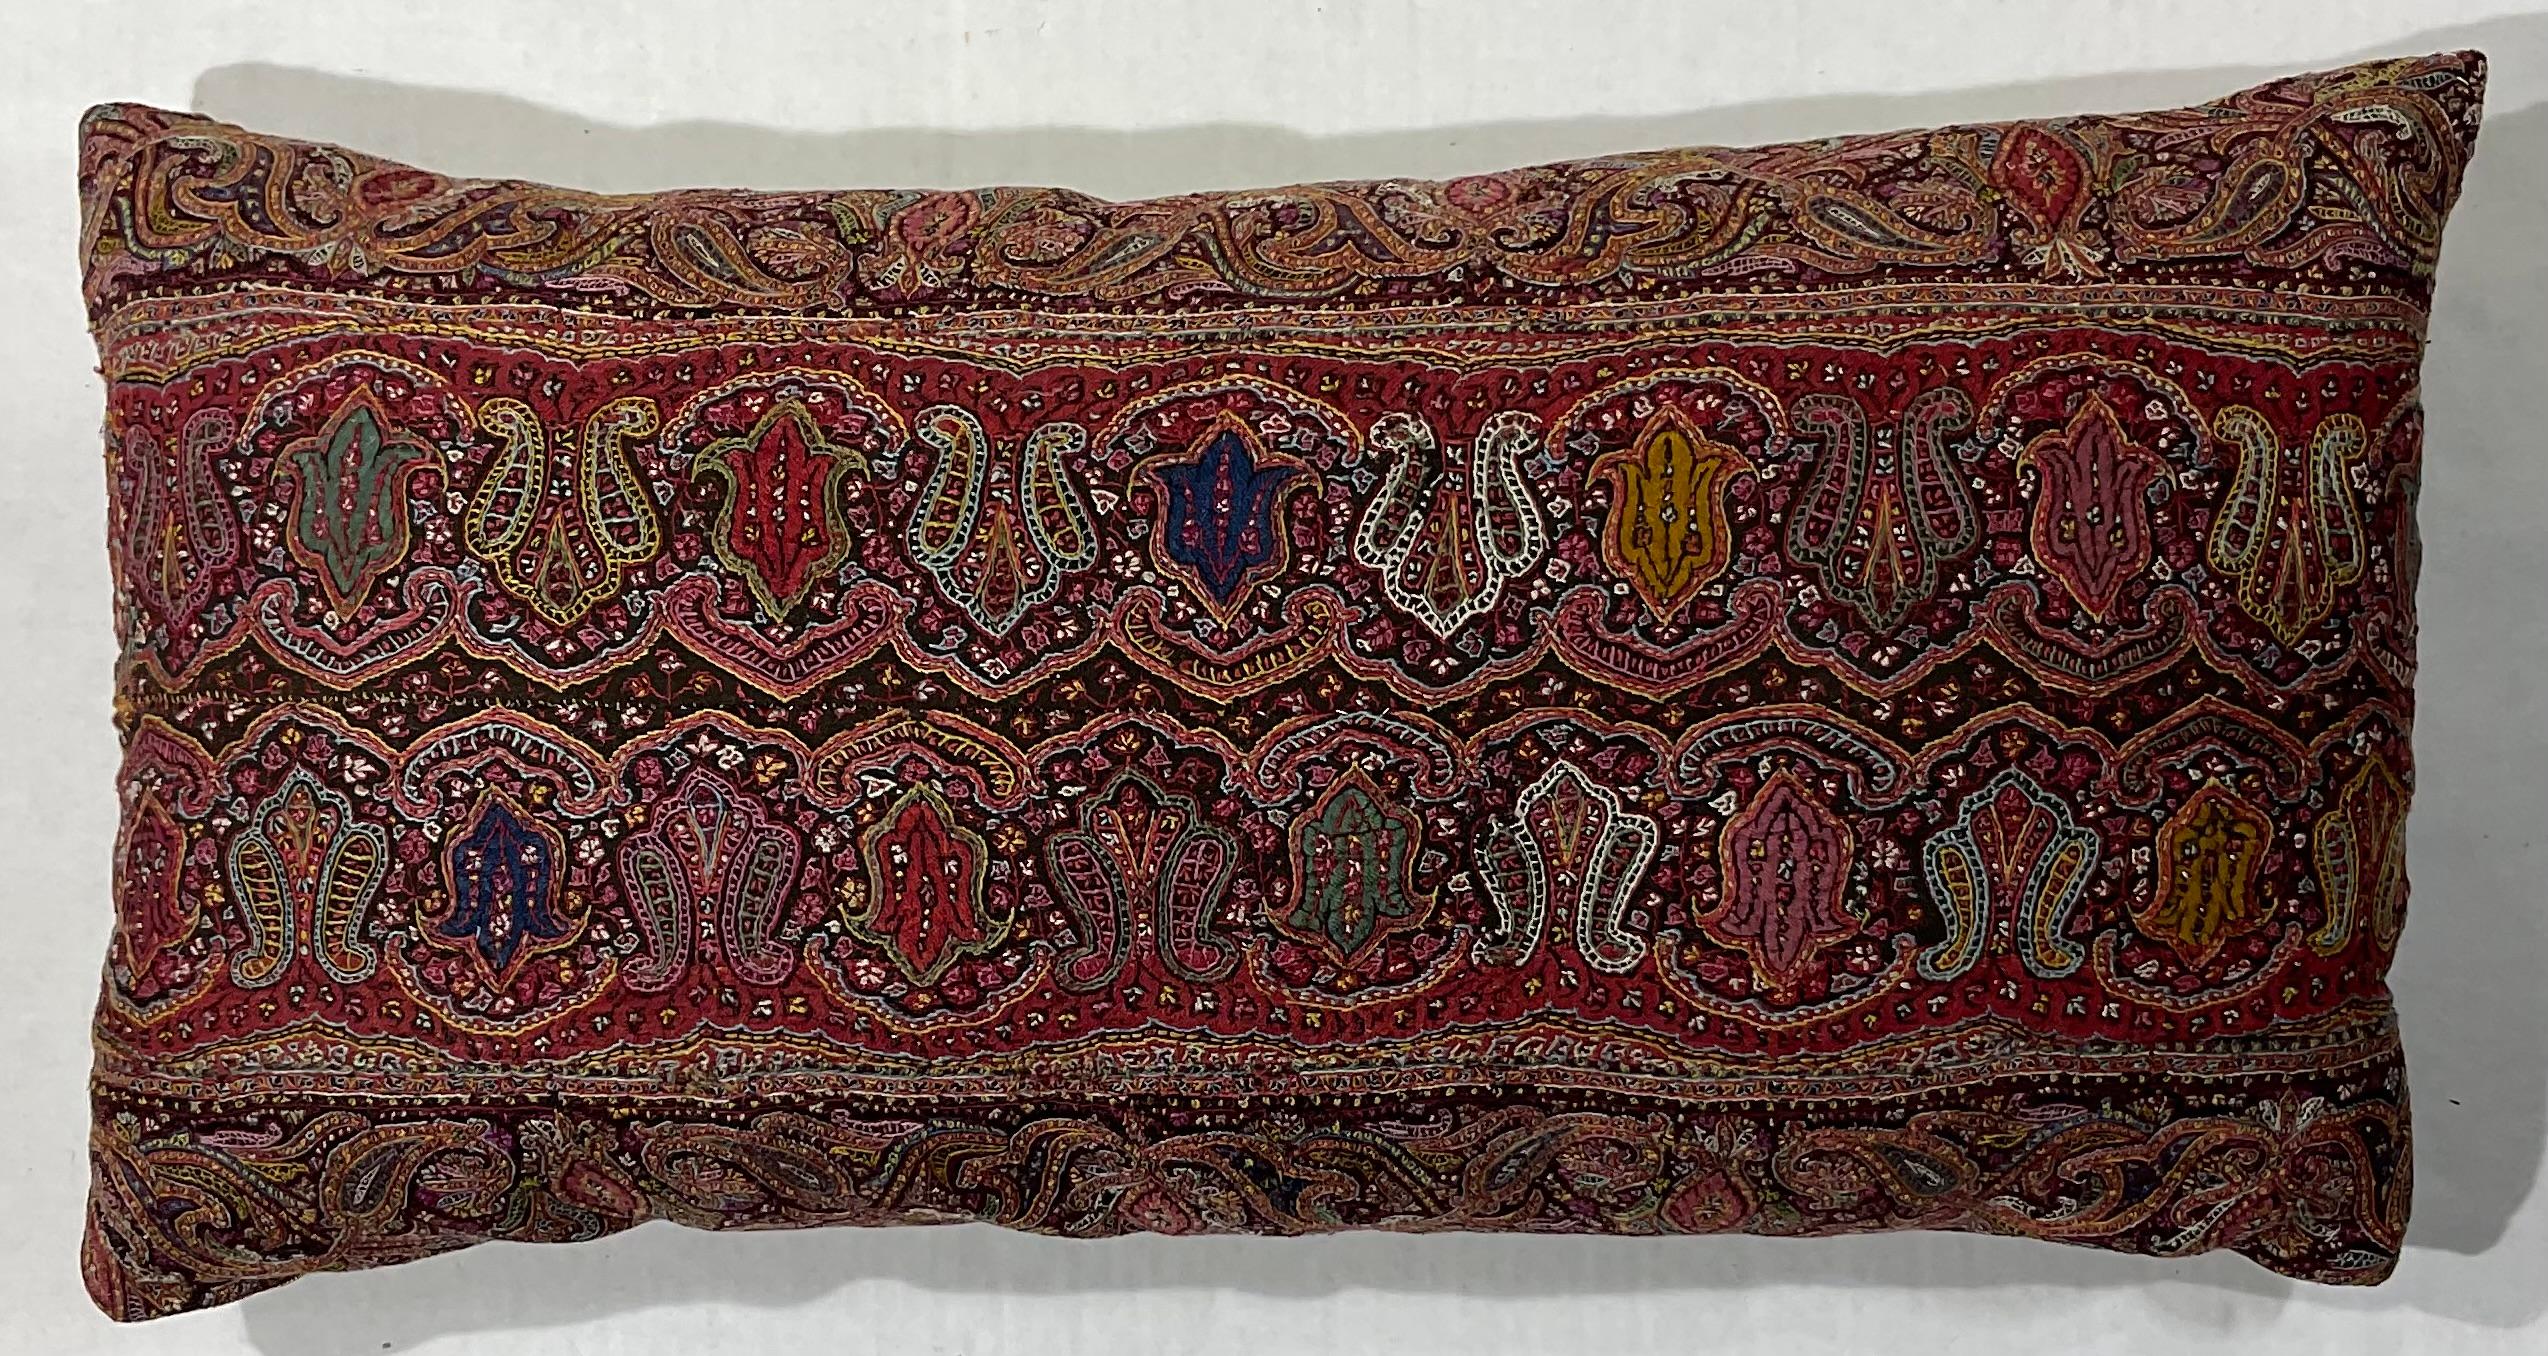 Beautiful fine hand embroidery front pillow made of antique Persian Kermonsha province textile.
Very detailed vivid floral motifs.
Fresh insert ,fine cotton backing.